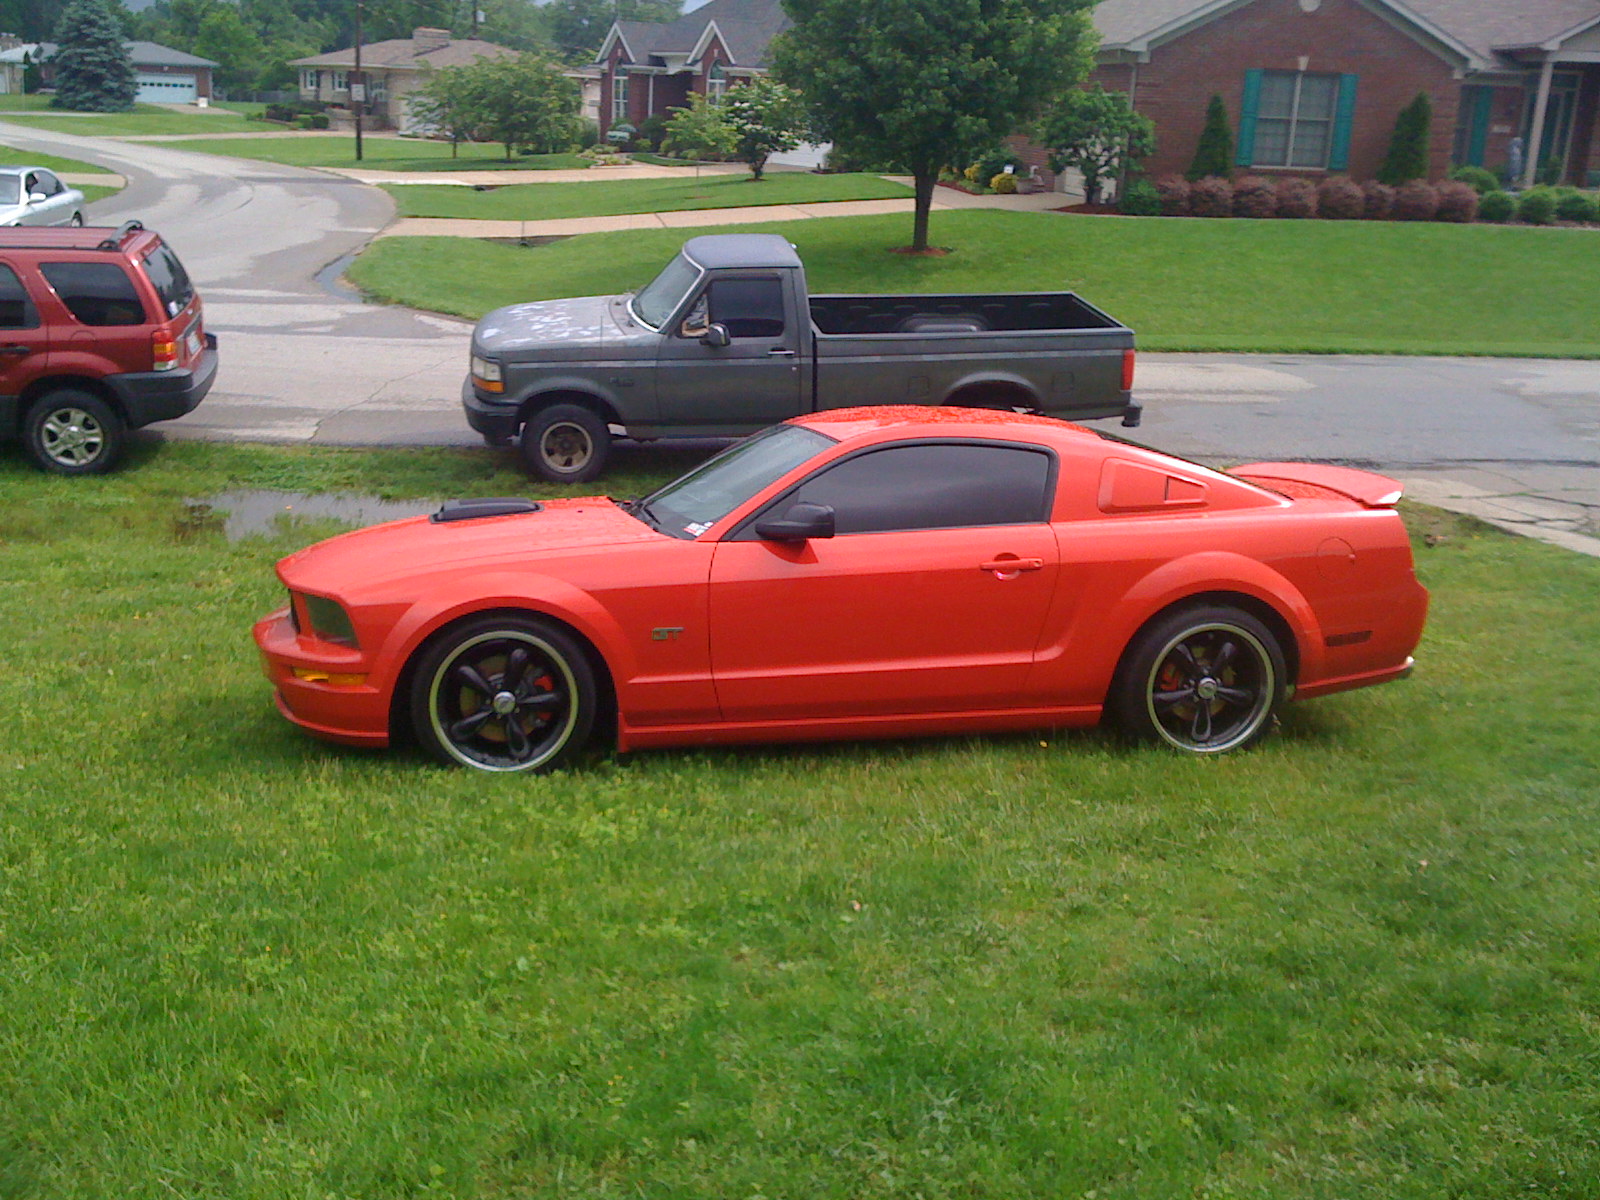 2005 Ford mustang 0-60 times #7